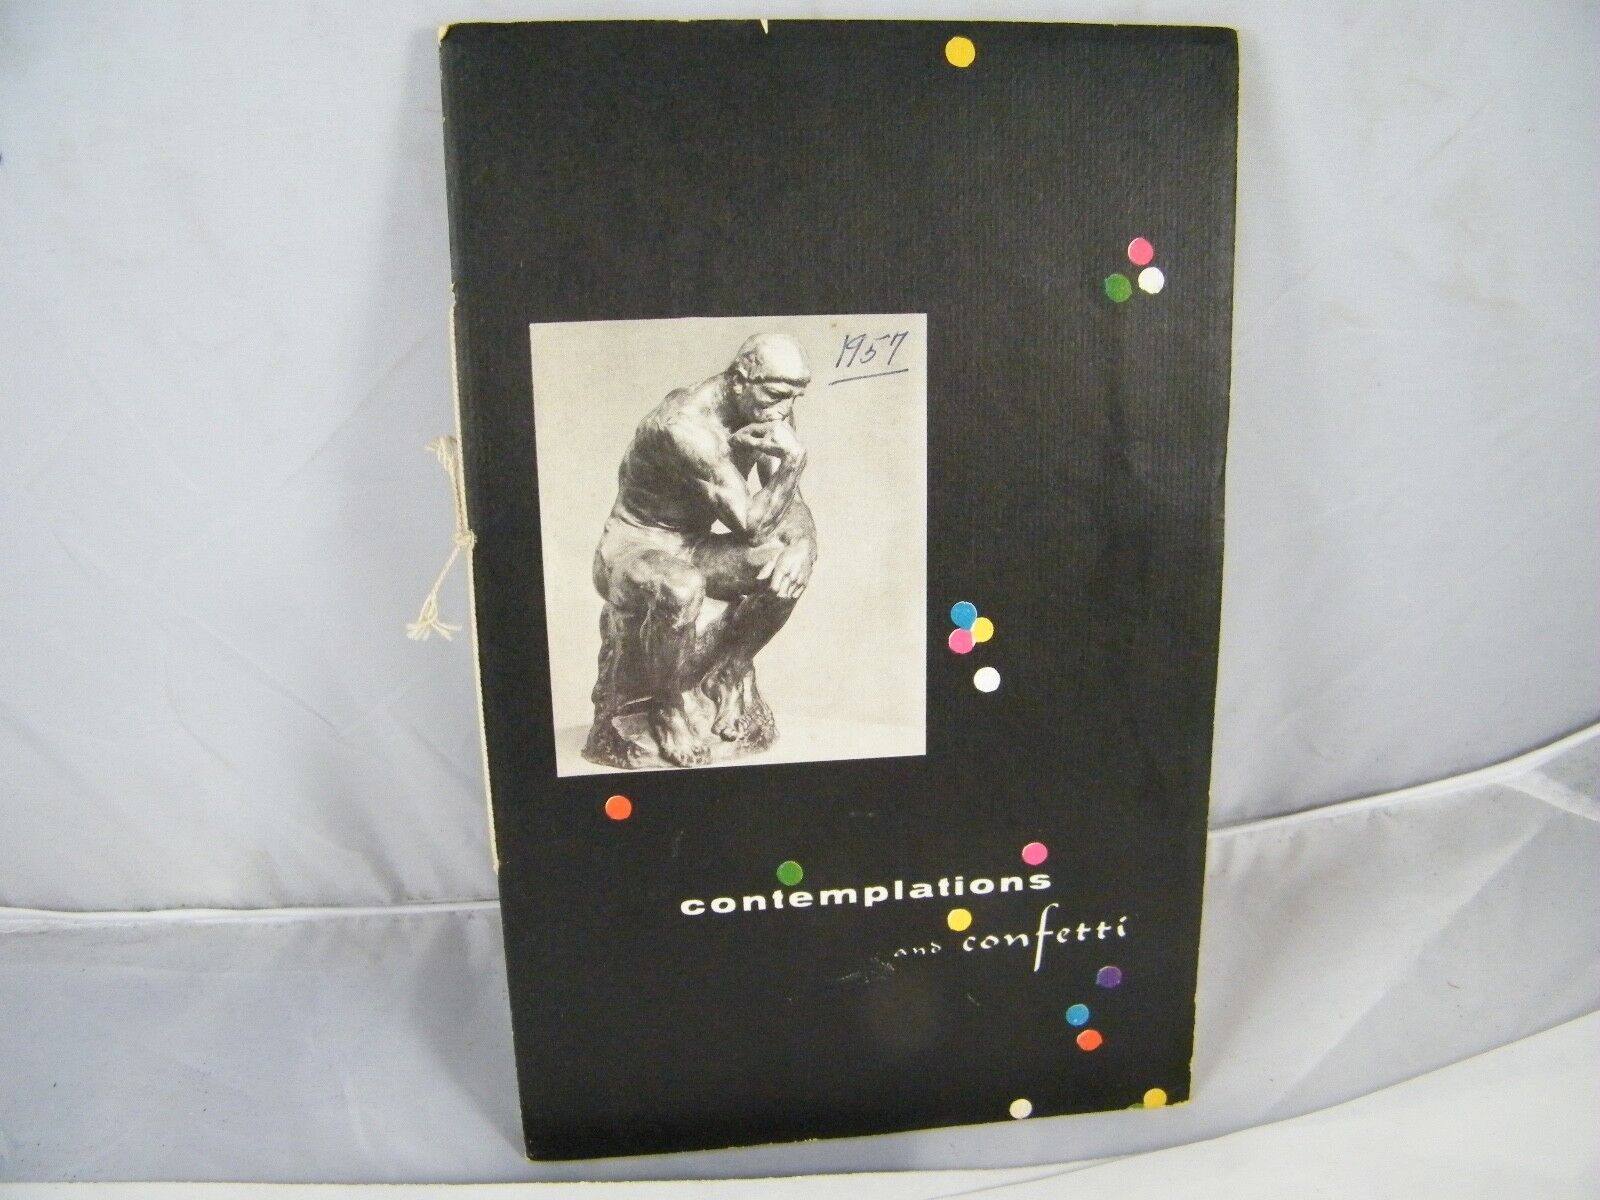 1957 HENRY BRODERICK ~ HISTORICAL BOOKLET ~ CONTEMPLATIONS AND CONFETTI ~ SIGNED